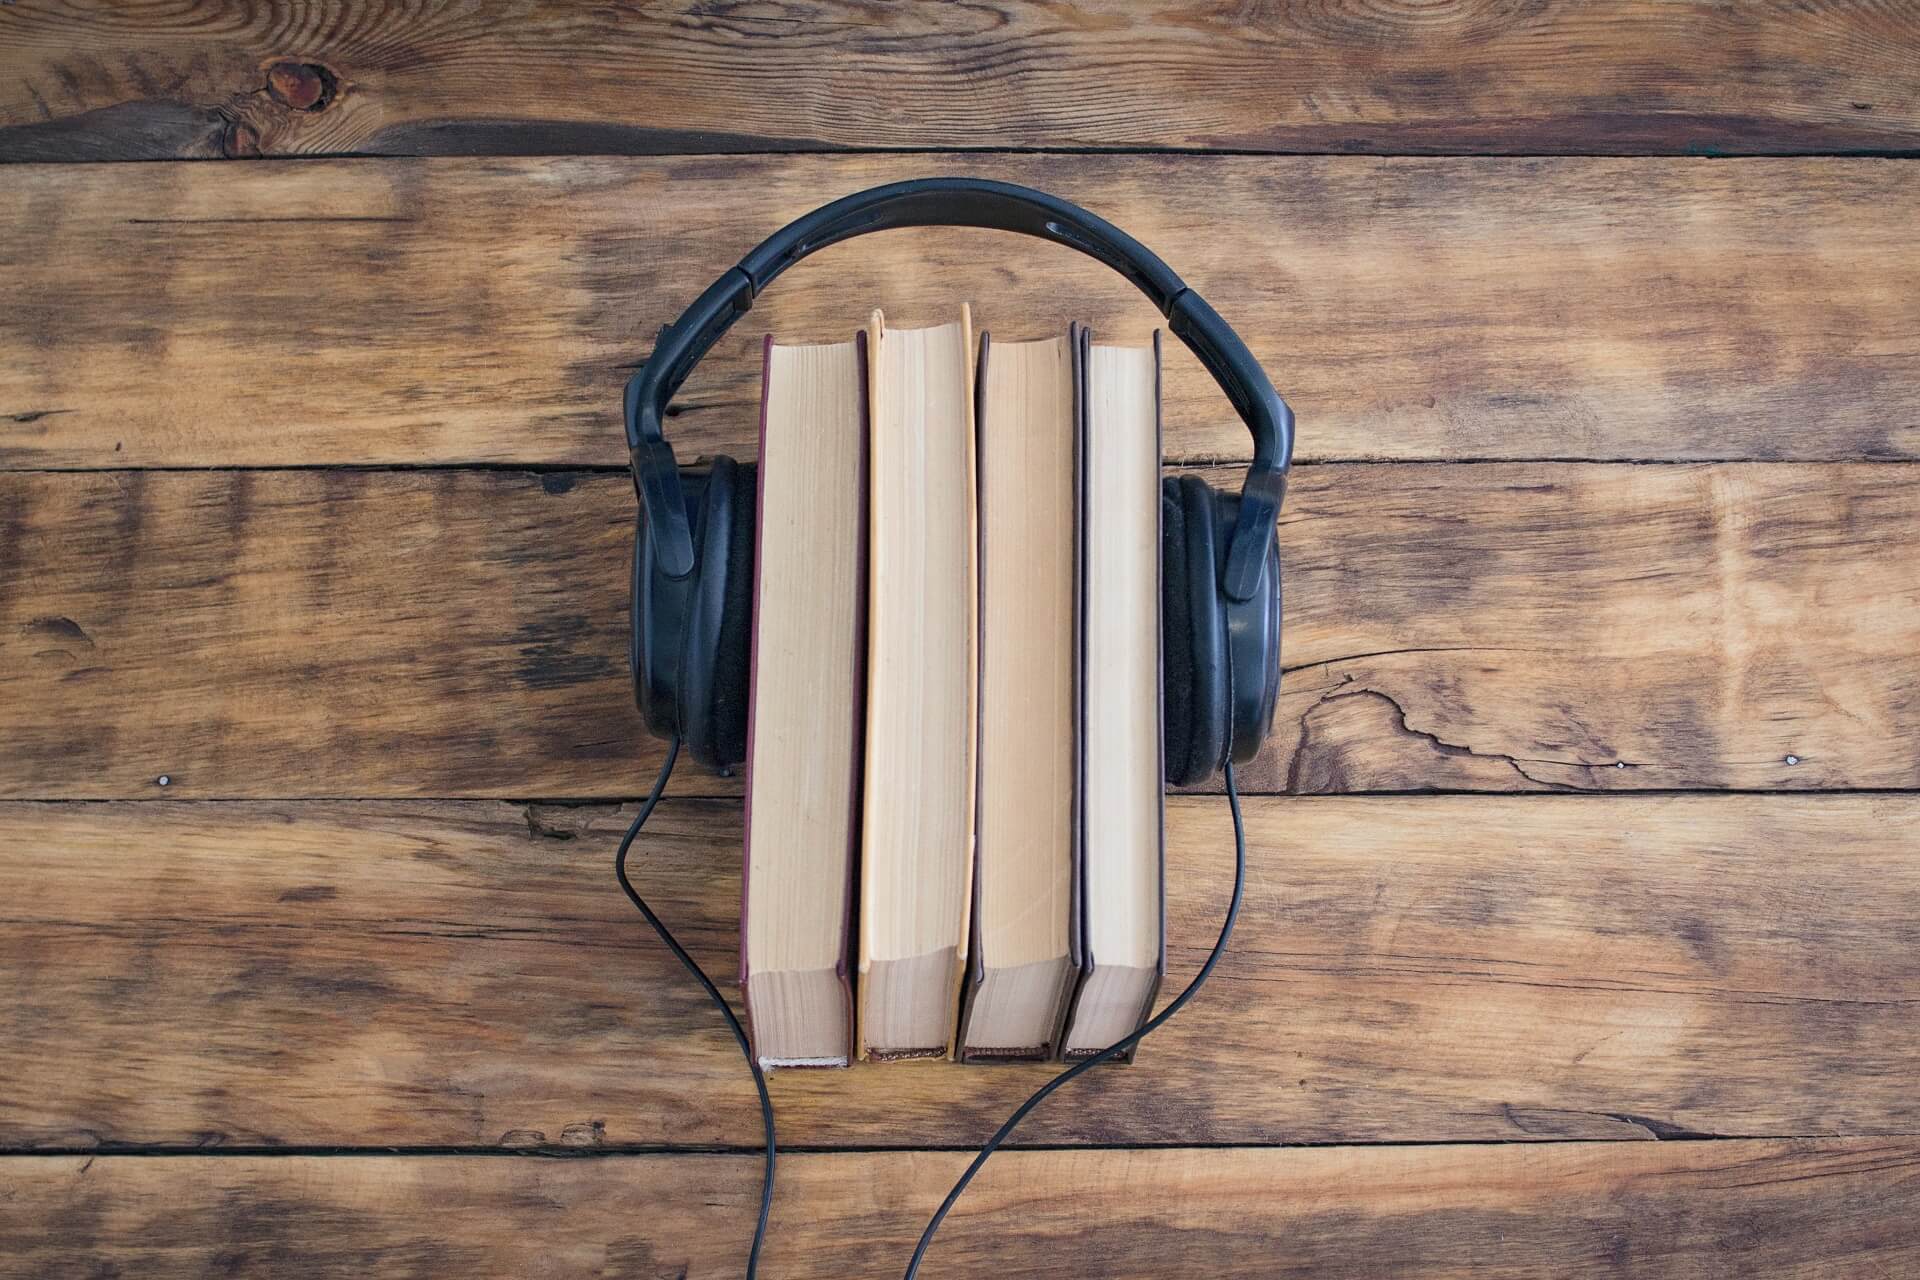 Best audiobook players for PC users